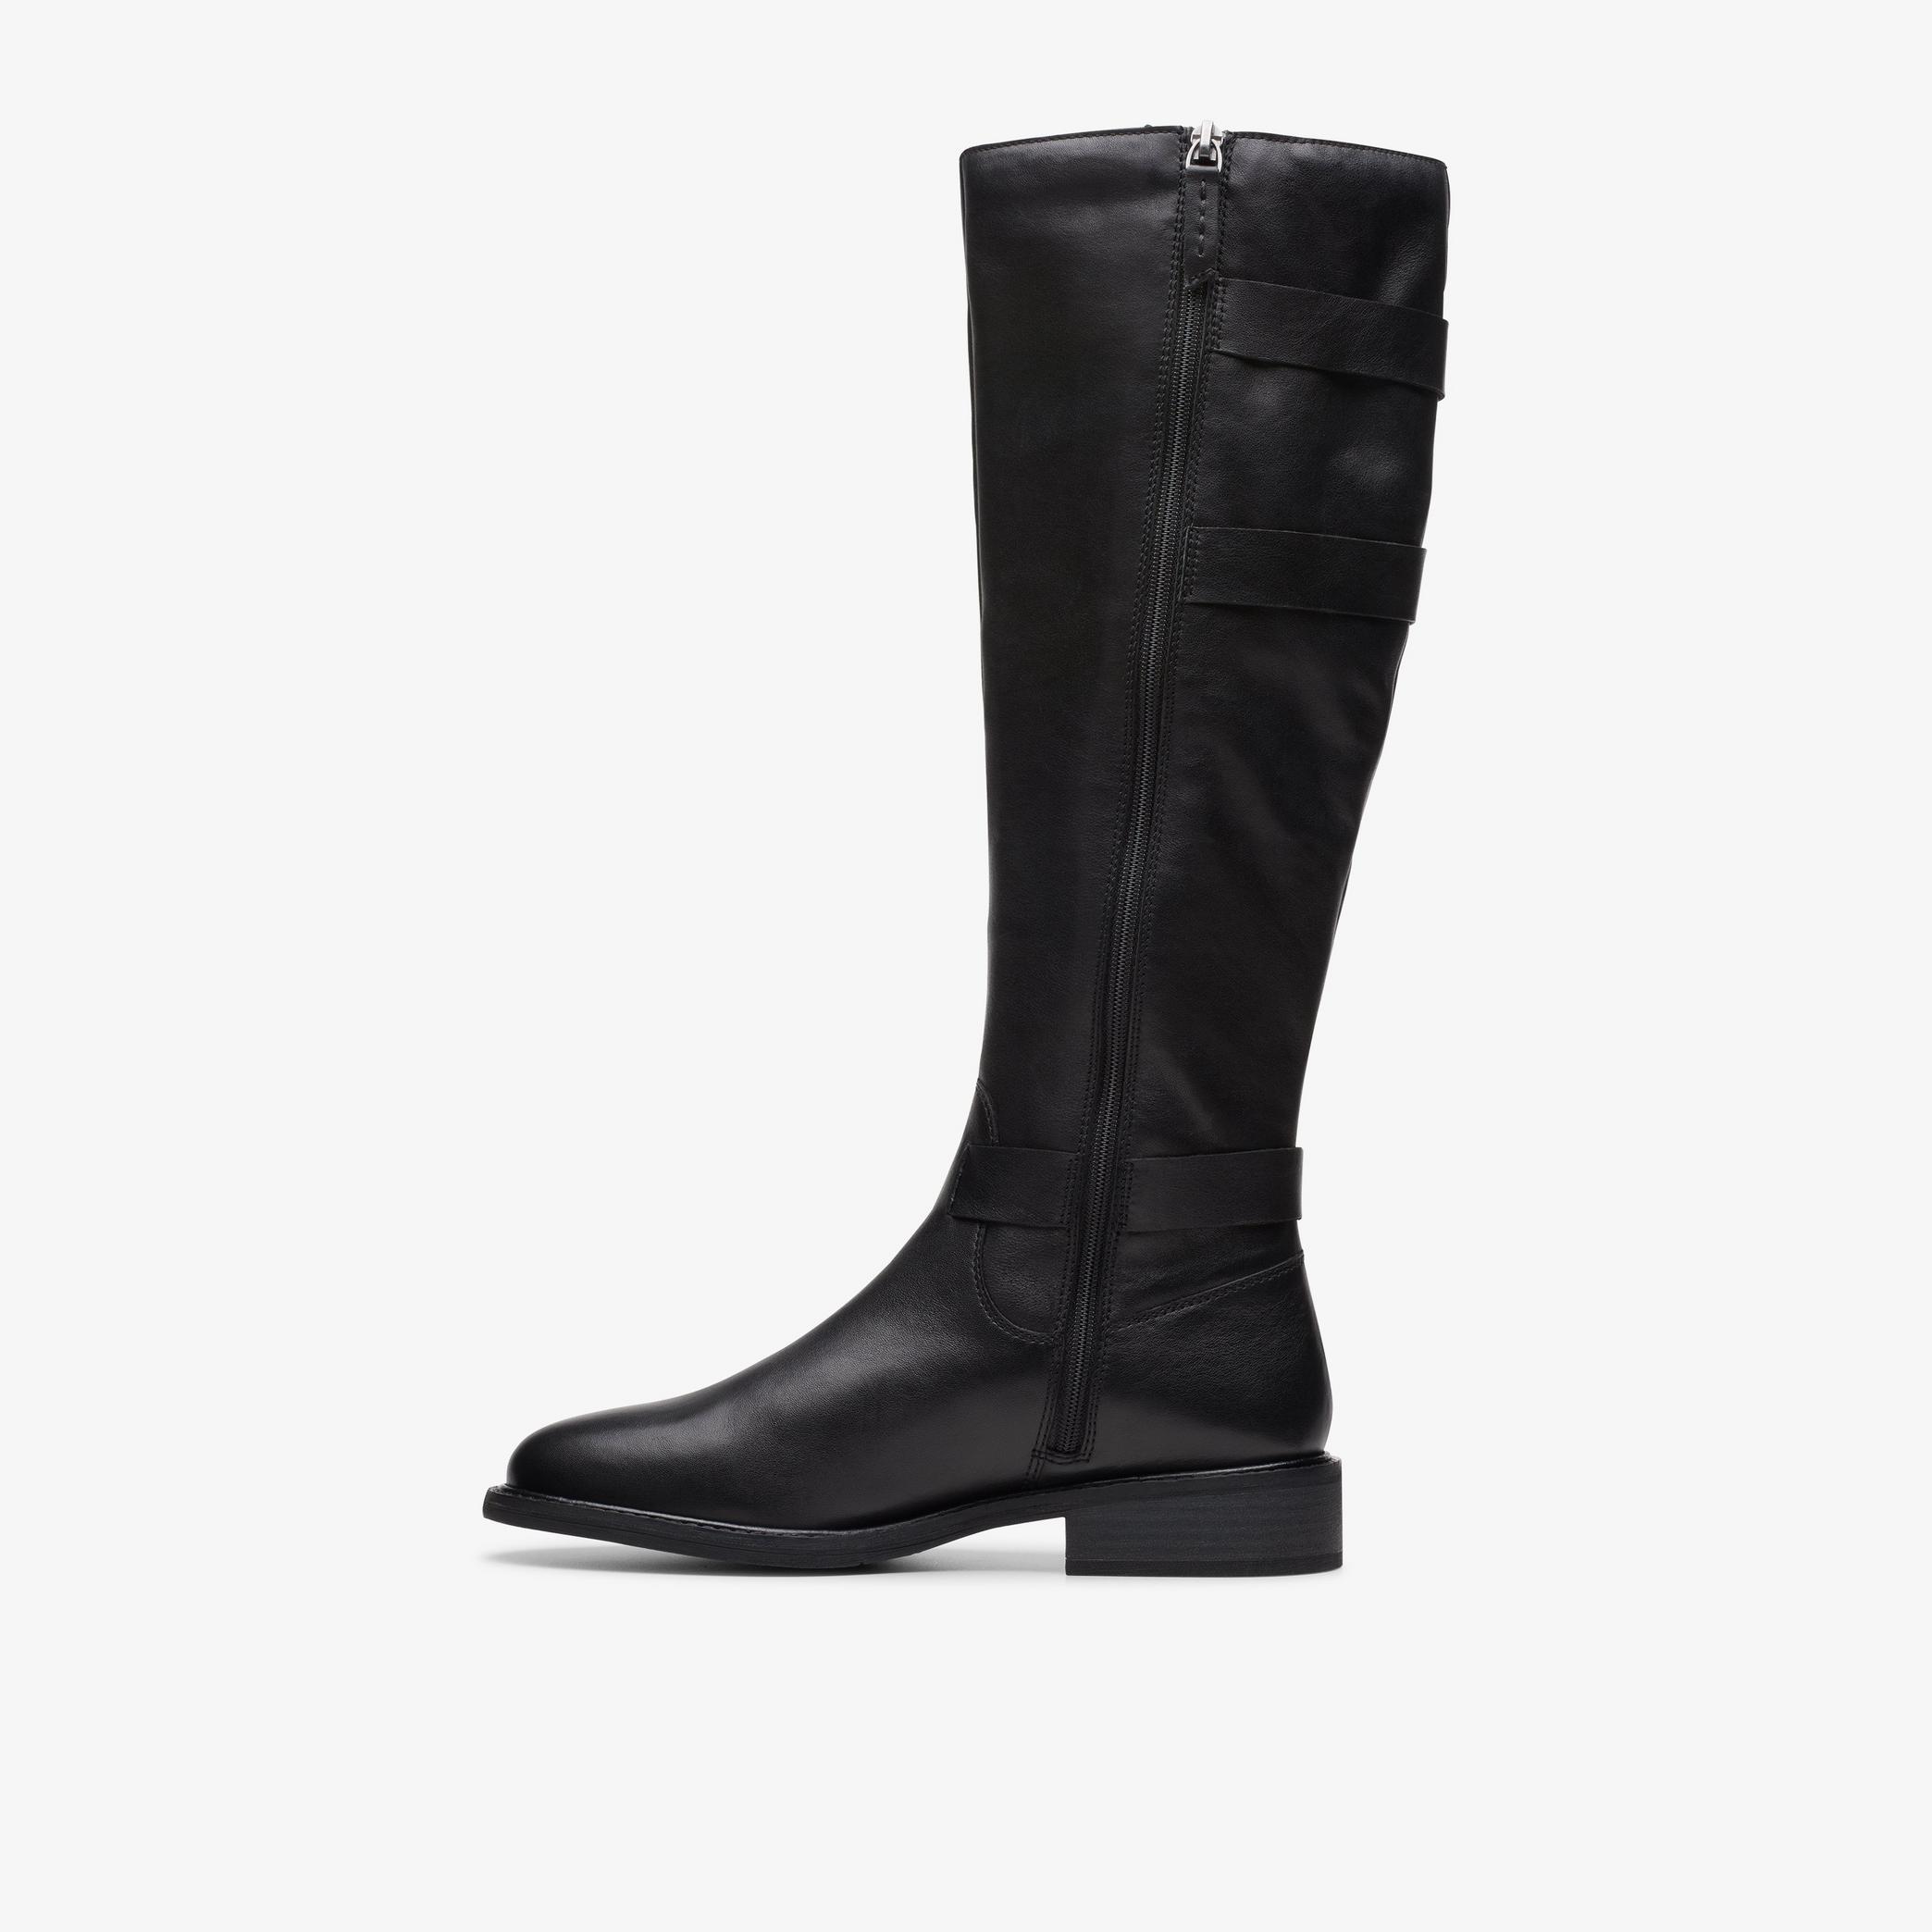 WOMENS Cologne Up Black Leather Knee High Boots | Clarks US